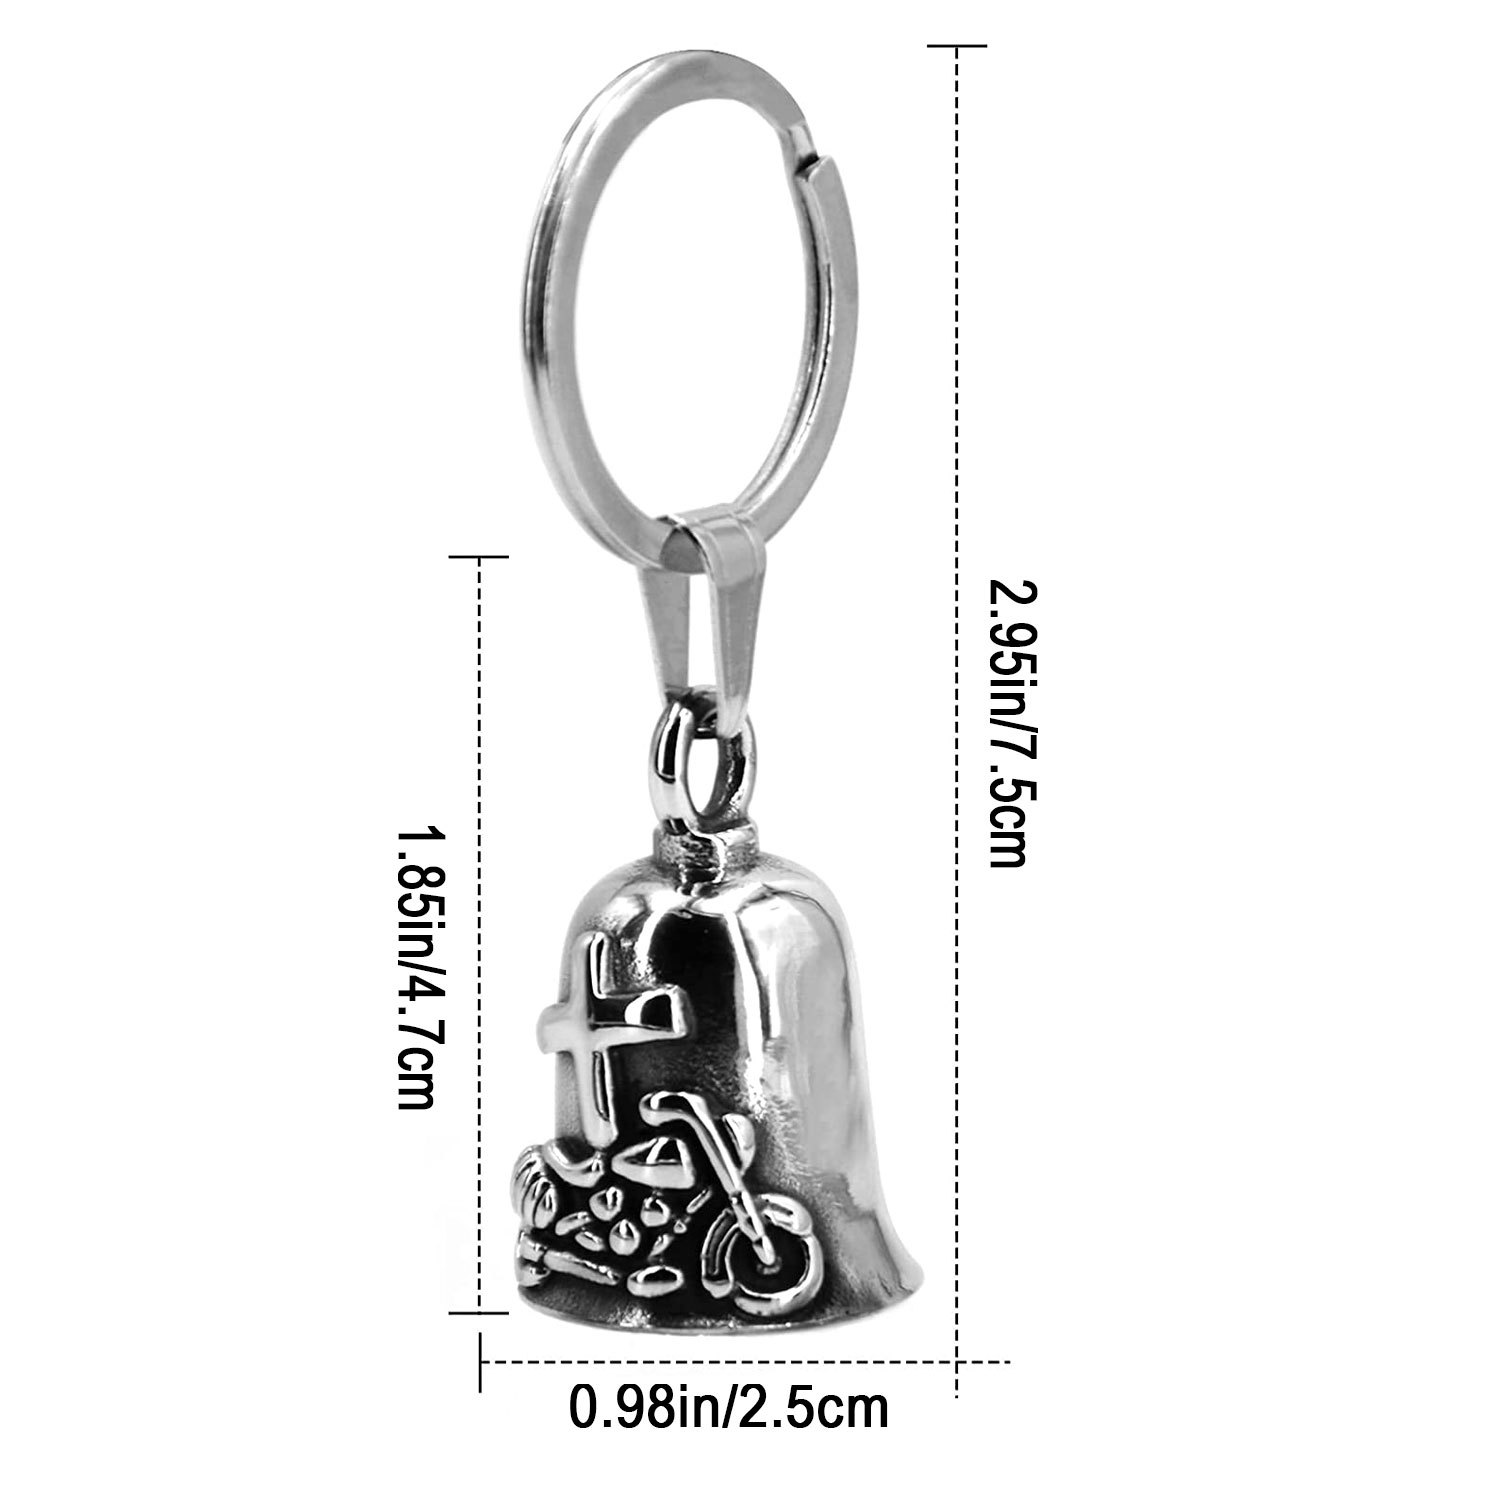 Guardian Bell Live To Ride Good Luck Bells w/Keyring & Black Velvet Gift  Bag, Motorcycle Bell, Good Luck Gift to Friends, Lead-Free Pewter Bike  Bell